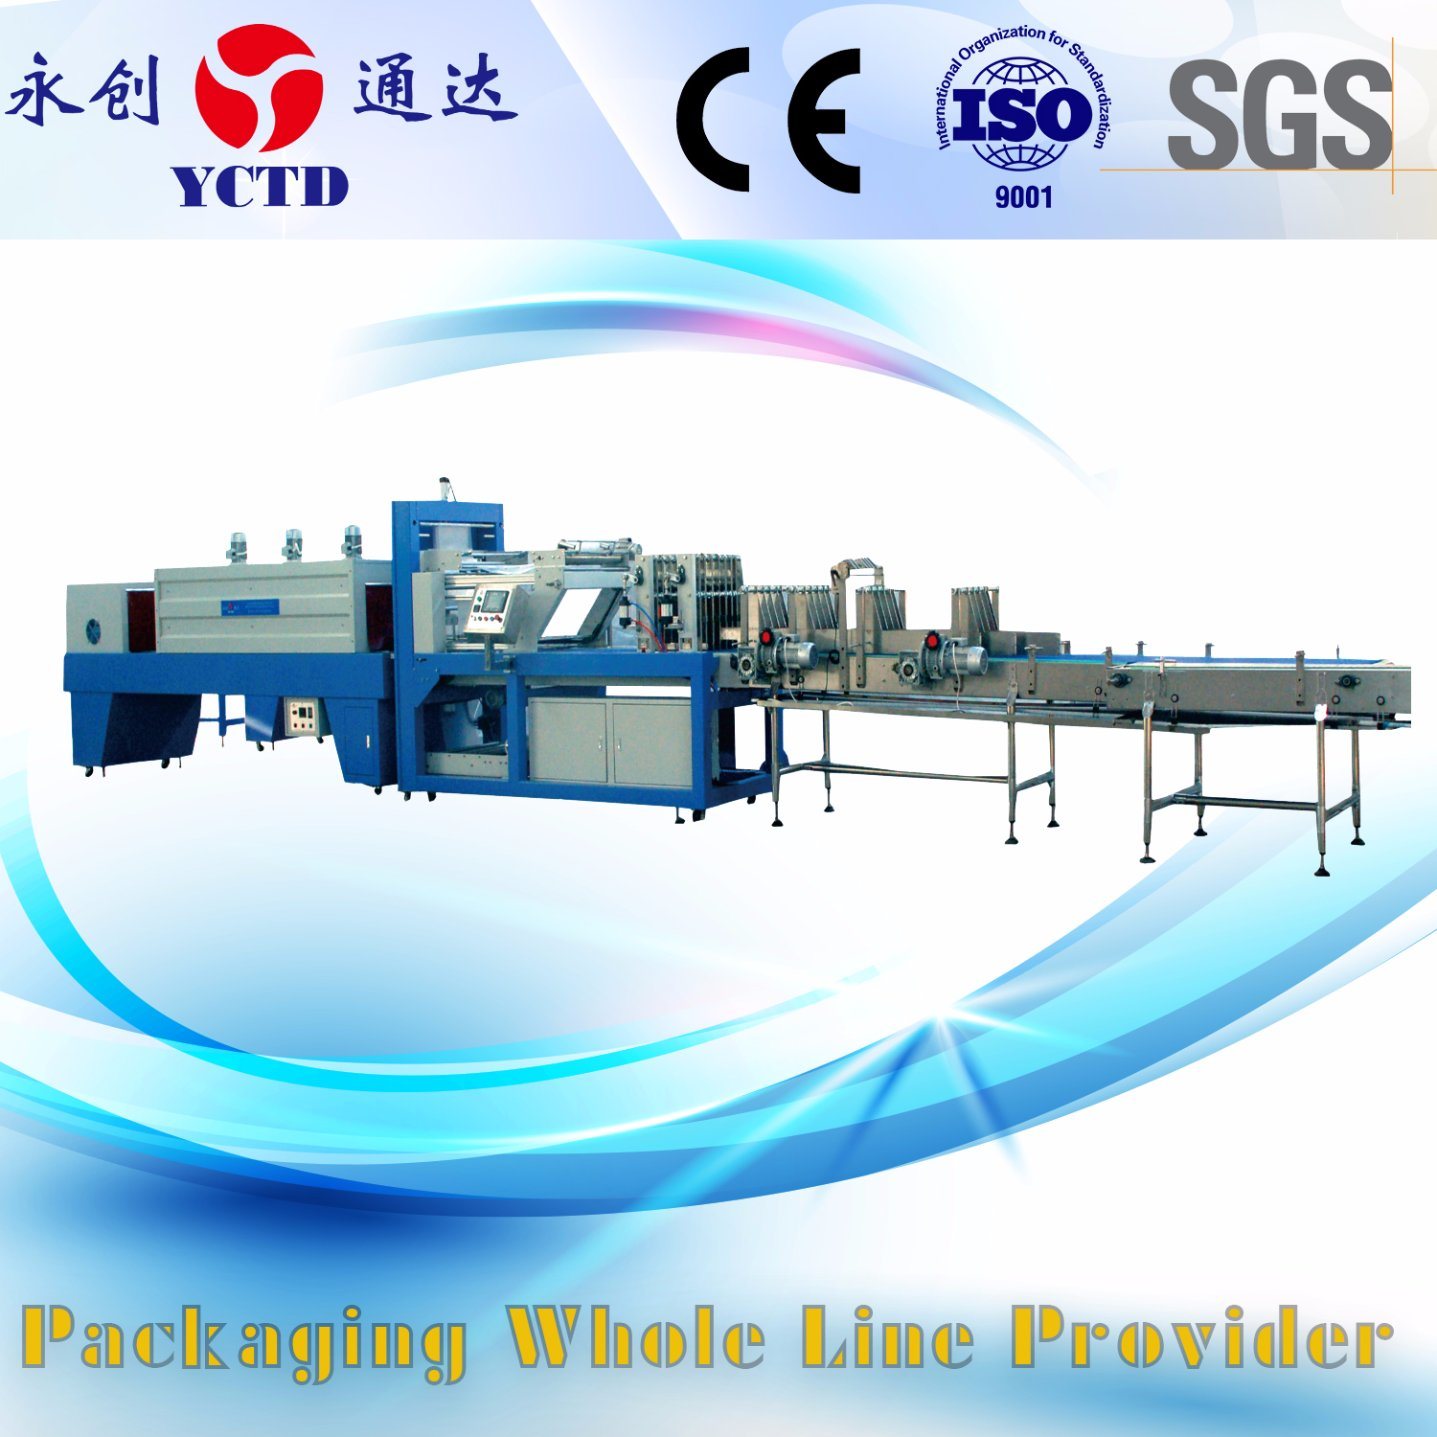 Small Shrink Wrapping machine/Heat Shrink Packaging Machine (YCTD)